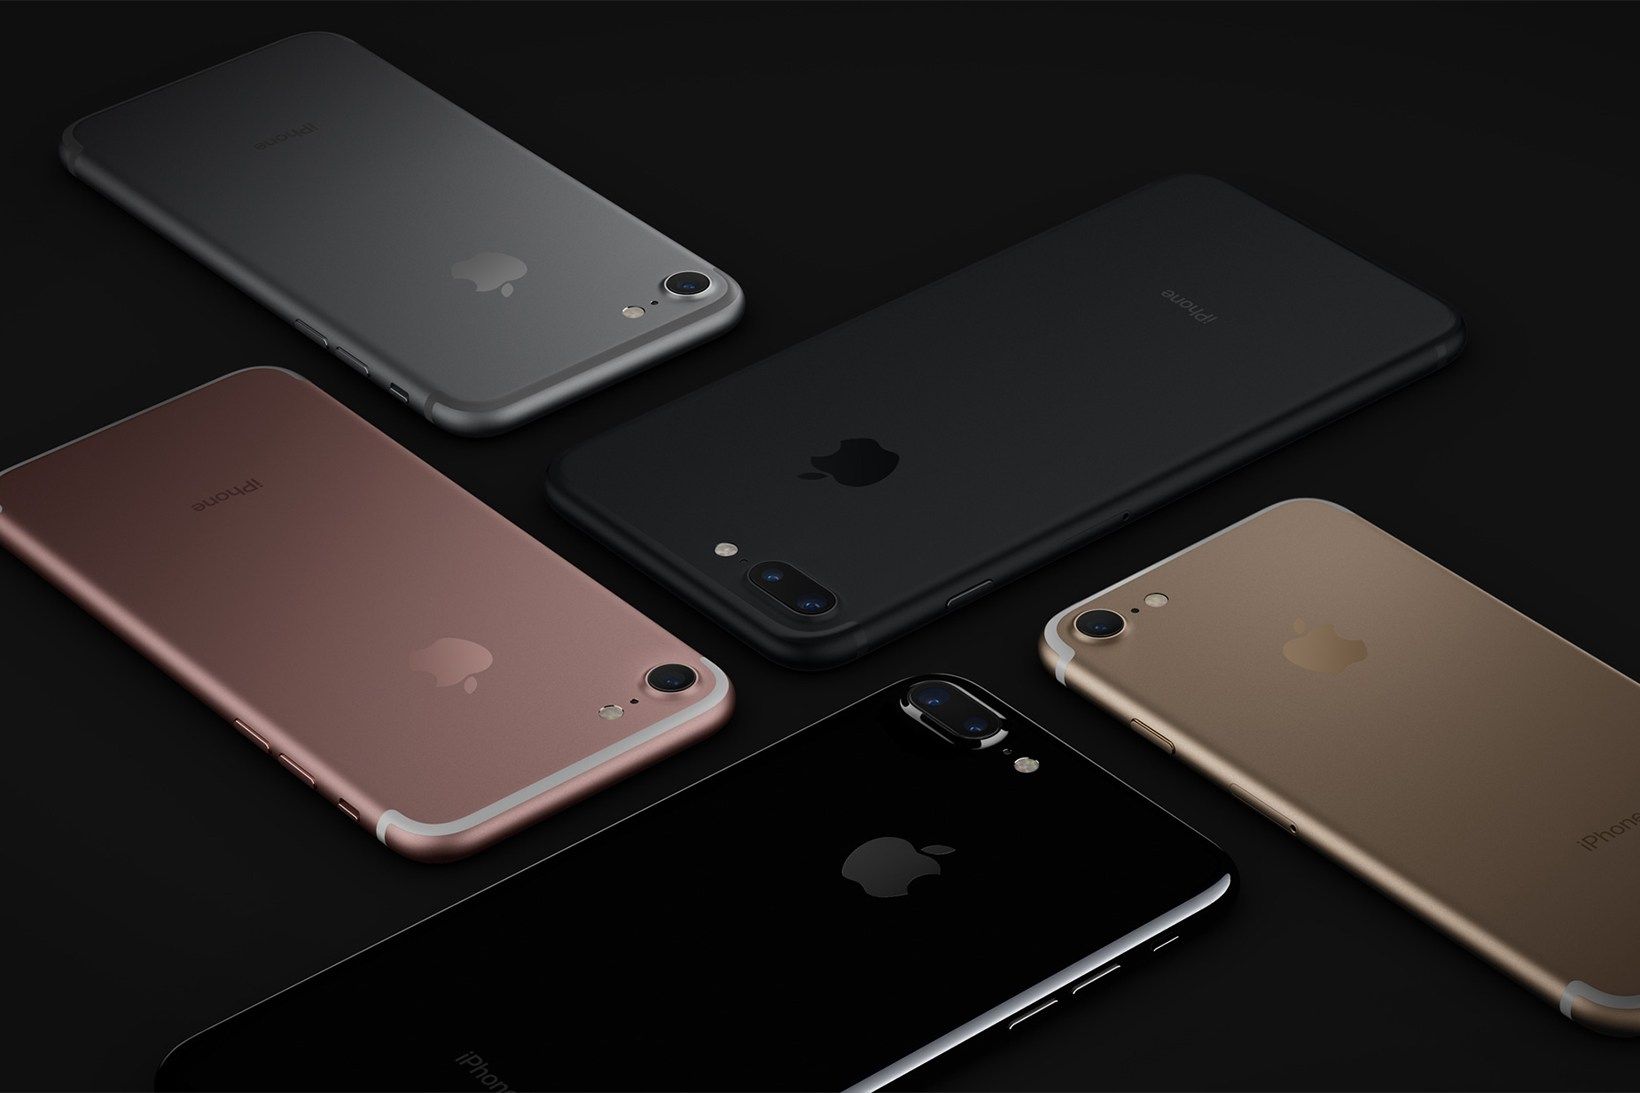 iPhone 7 release date, rumours, news, specs, price and everything